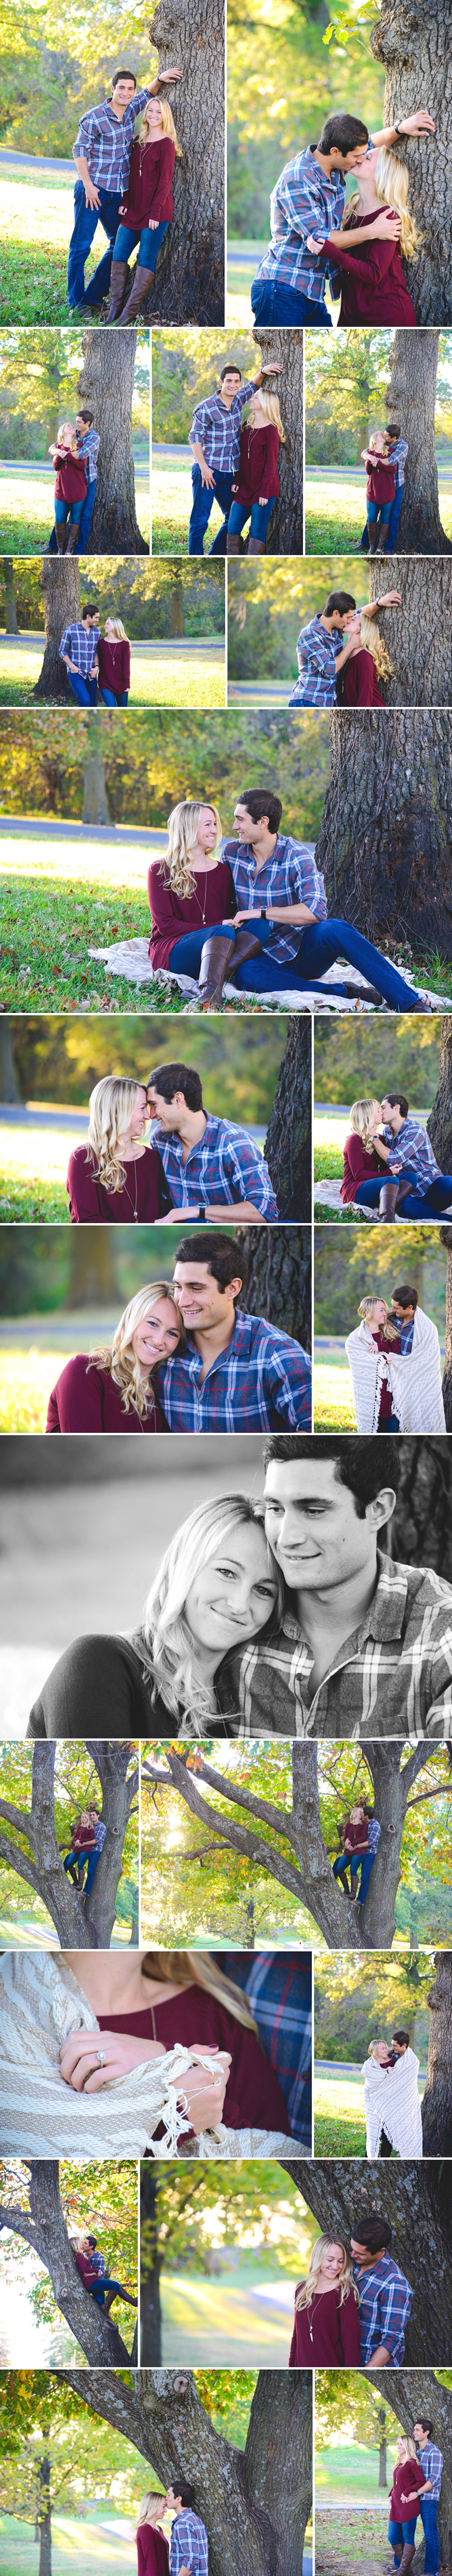 Paul + Lindsay | Engagement Pictures at Shawnee Mission Park - Lacey ...